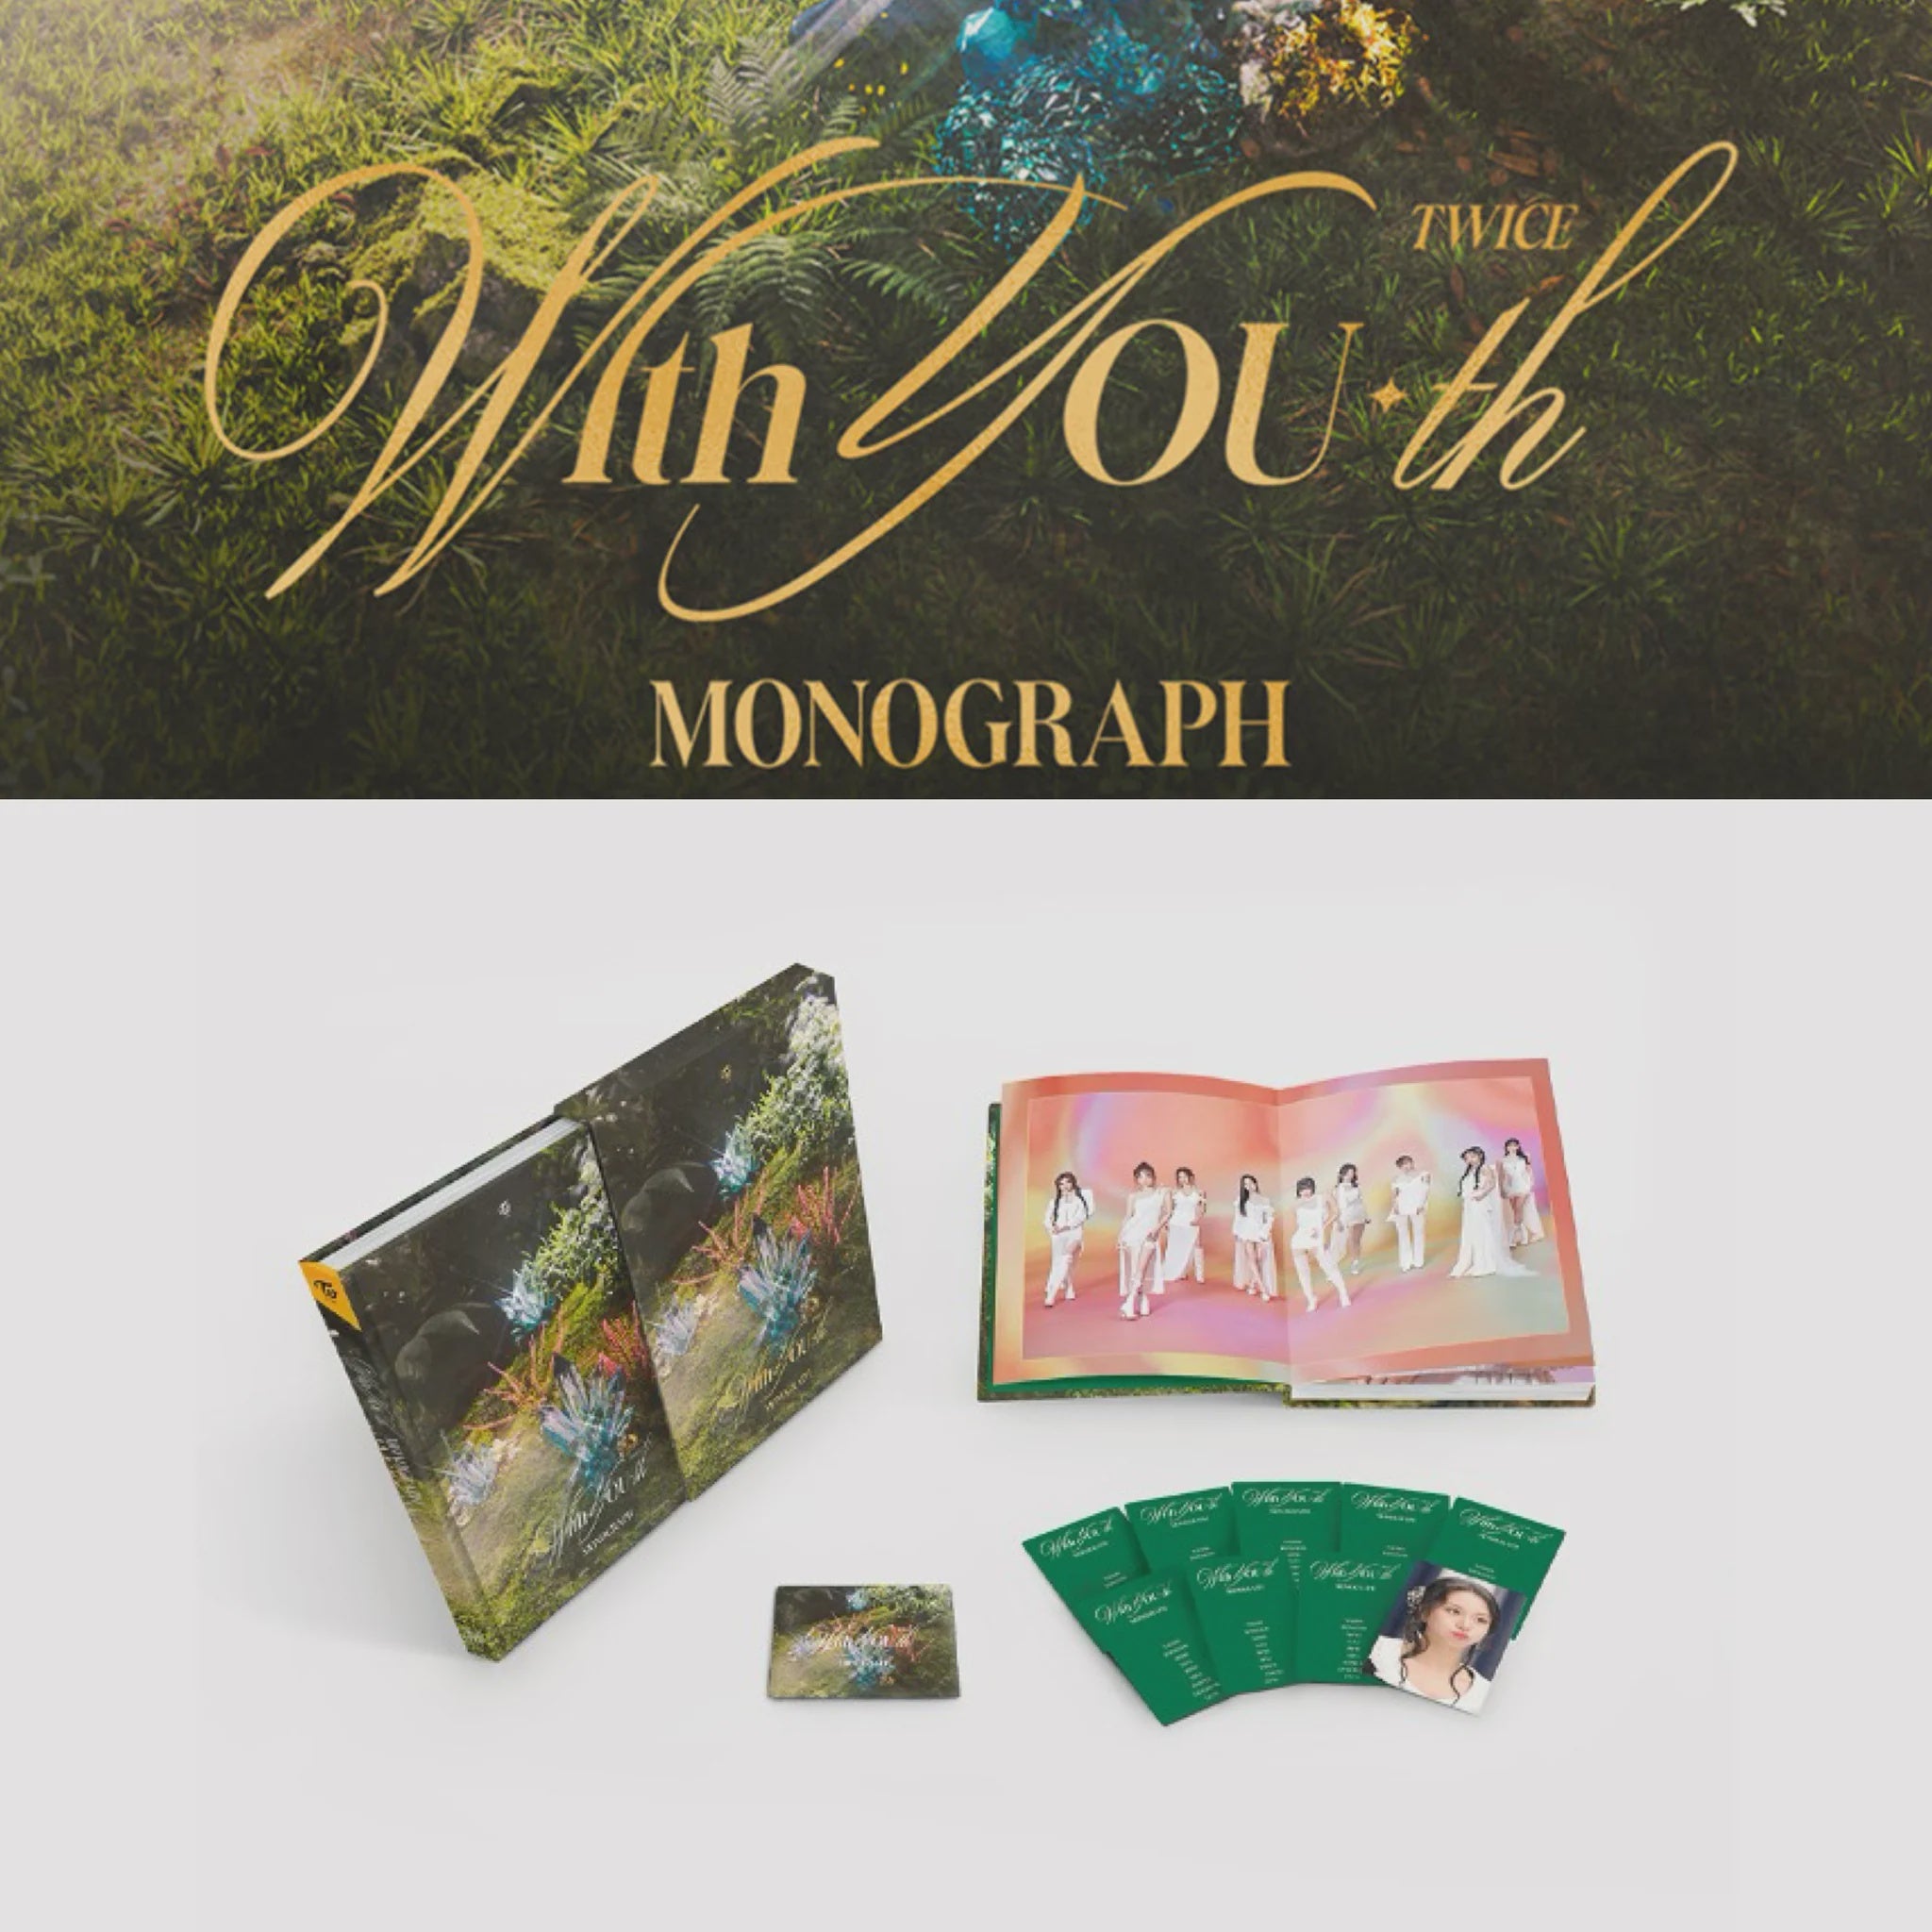 Twice-Monograph-withyou.jpg